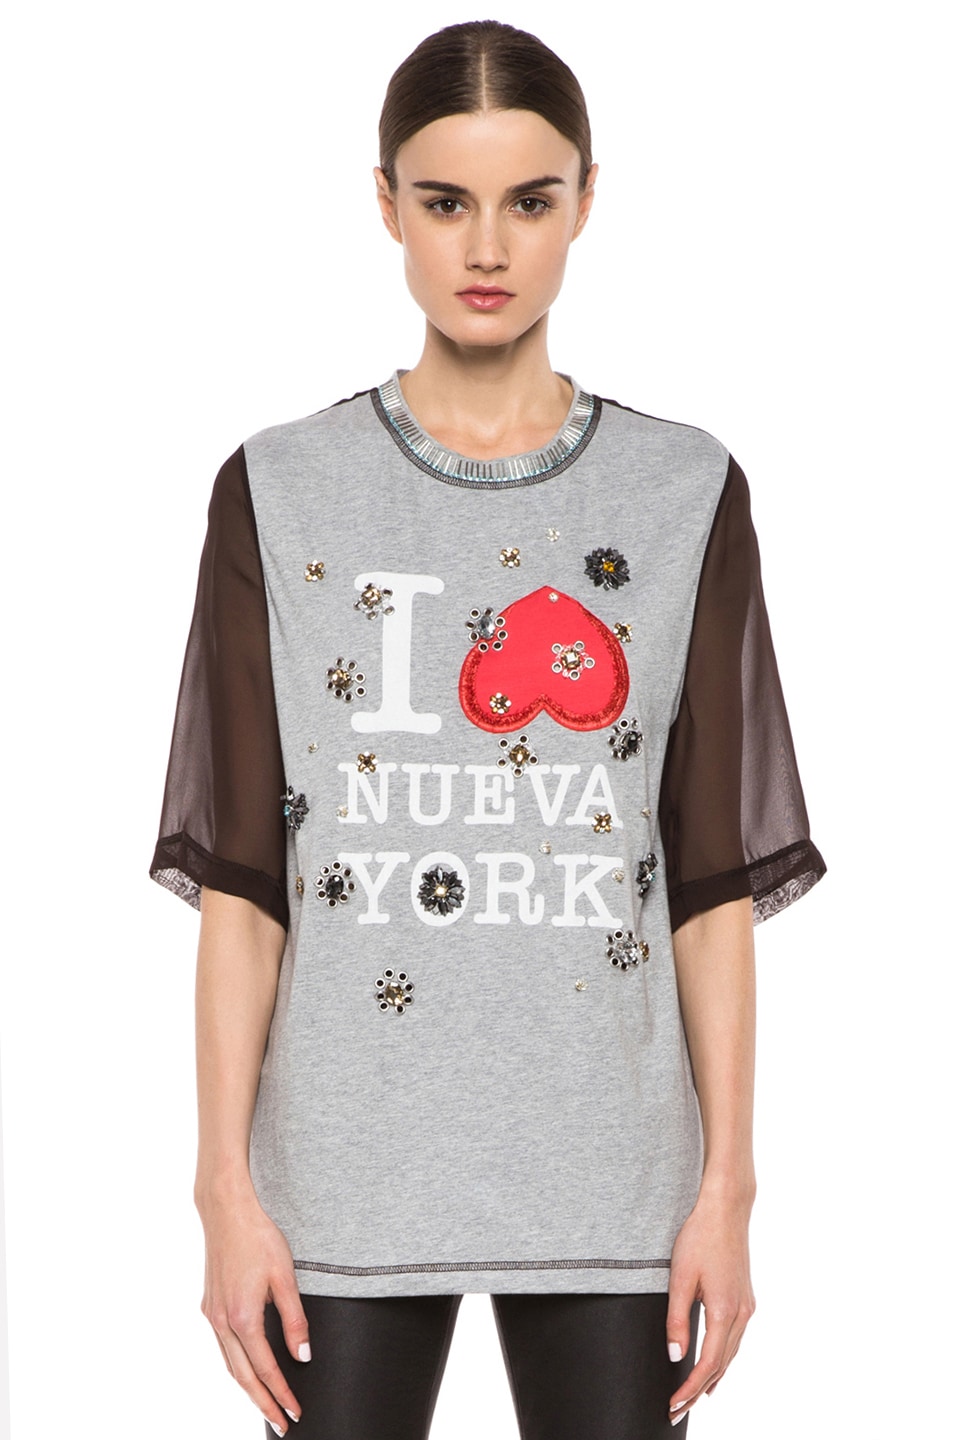 Image 1 of 3.1 phillip lim Nueva York Floral Eyelet Embroidery Tee in Heather Grey